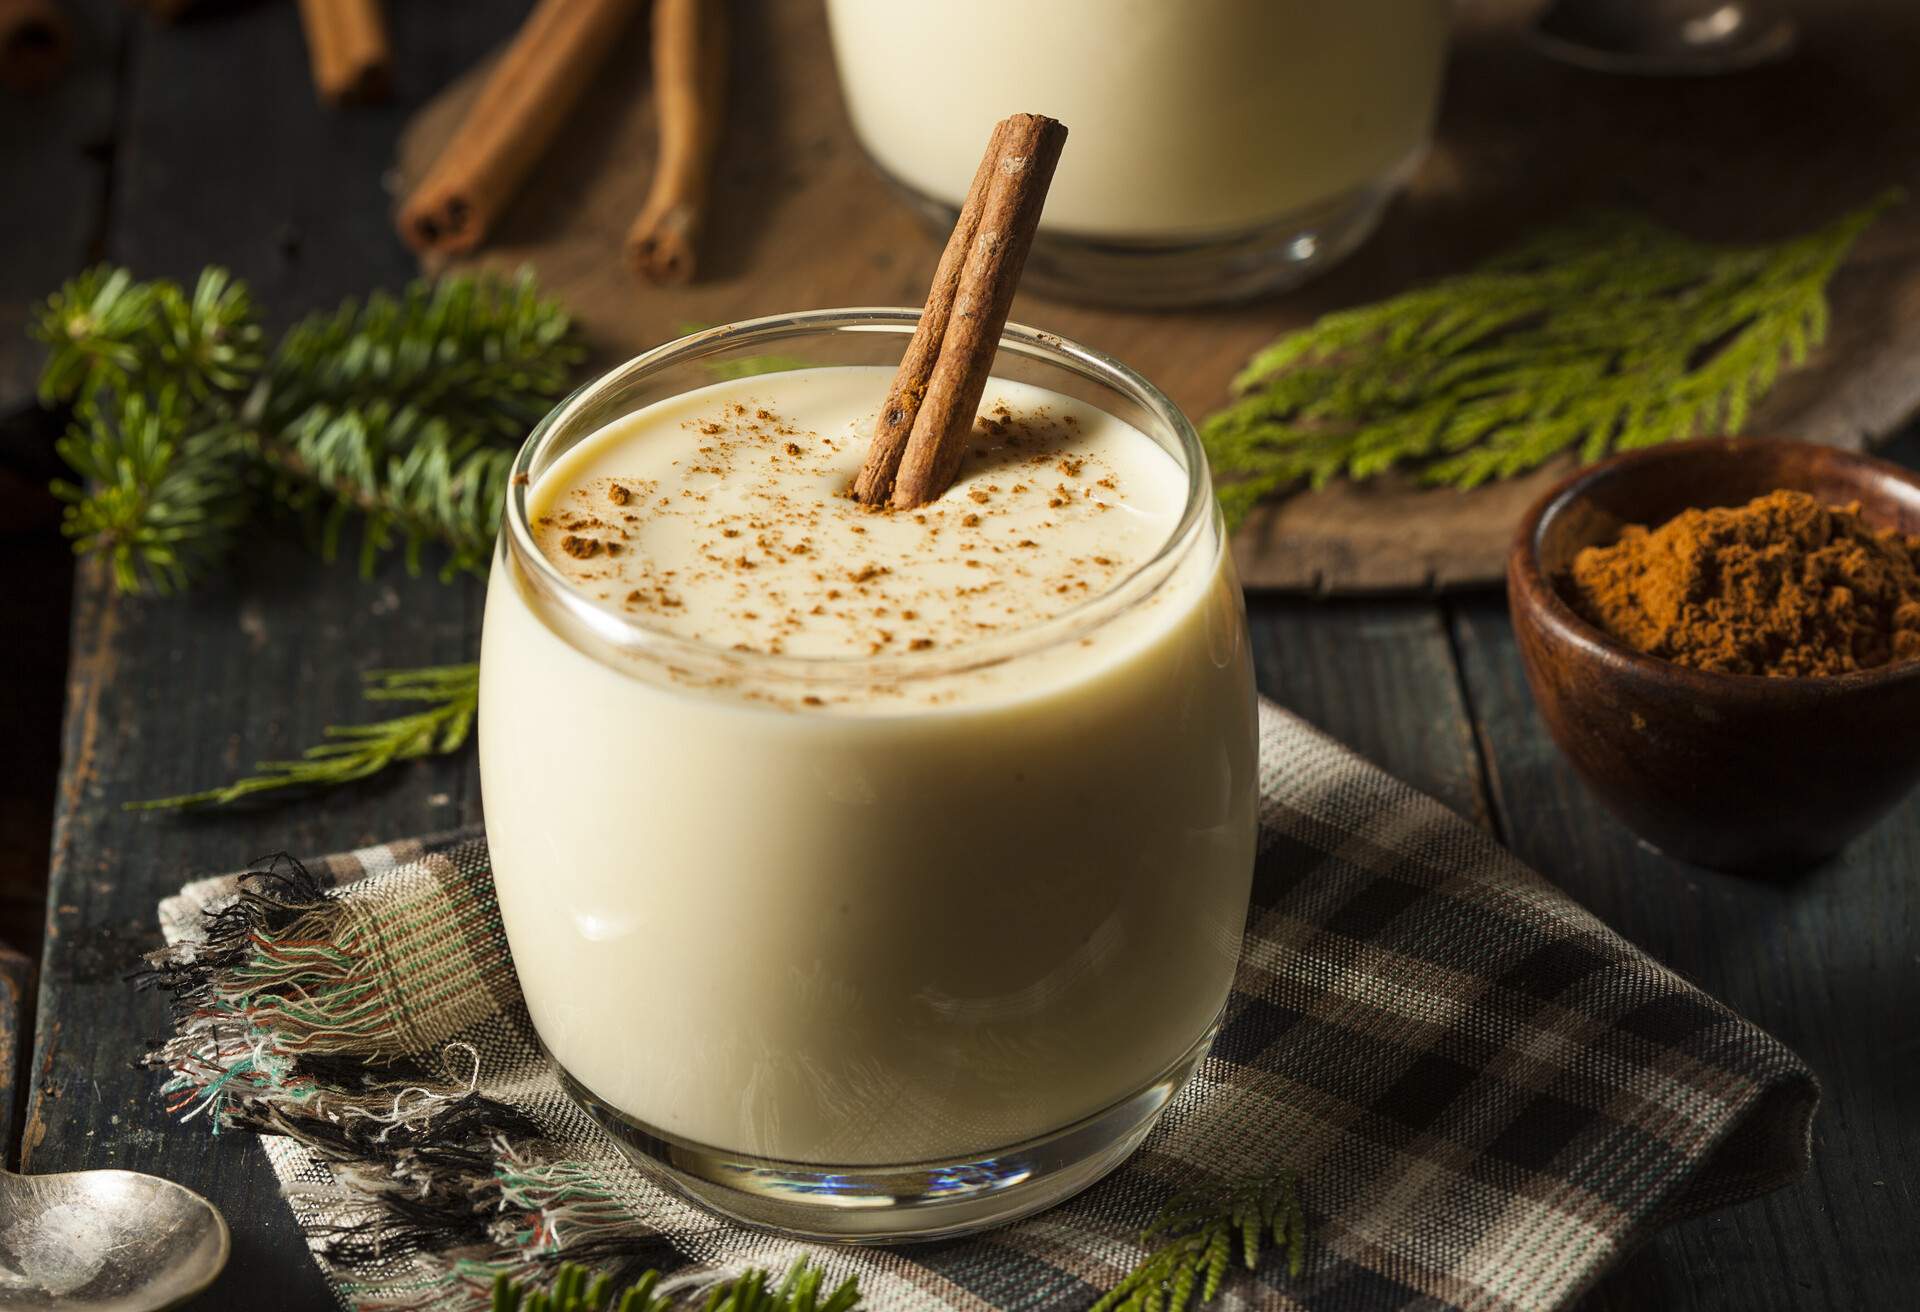 A glass of white foamy drink sprinkled with cinnamon powder and a cinnamon stick, on a wooden table.